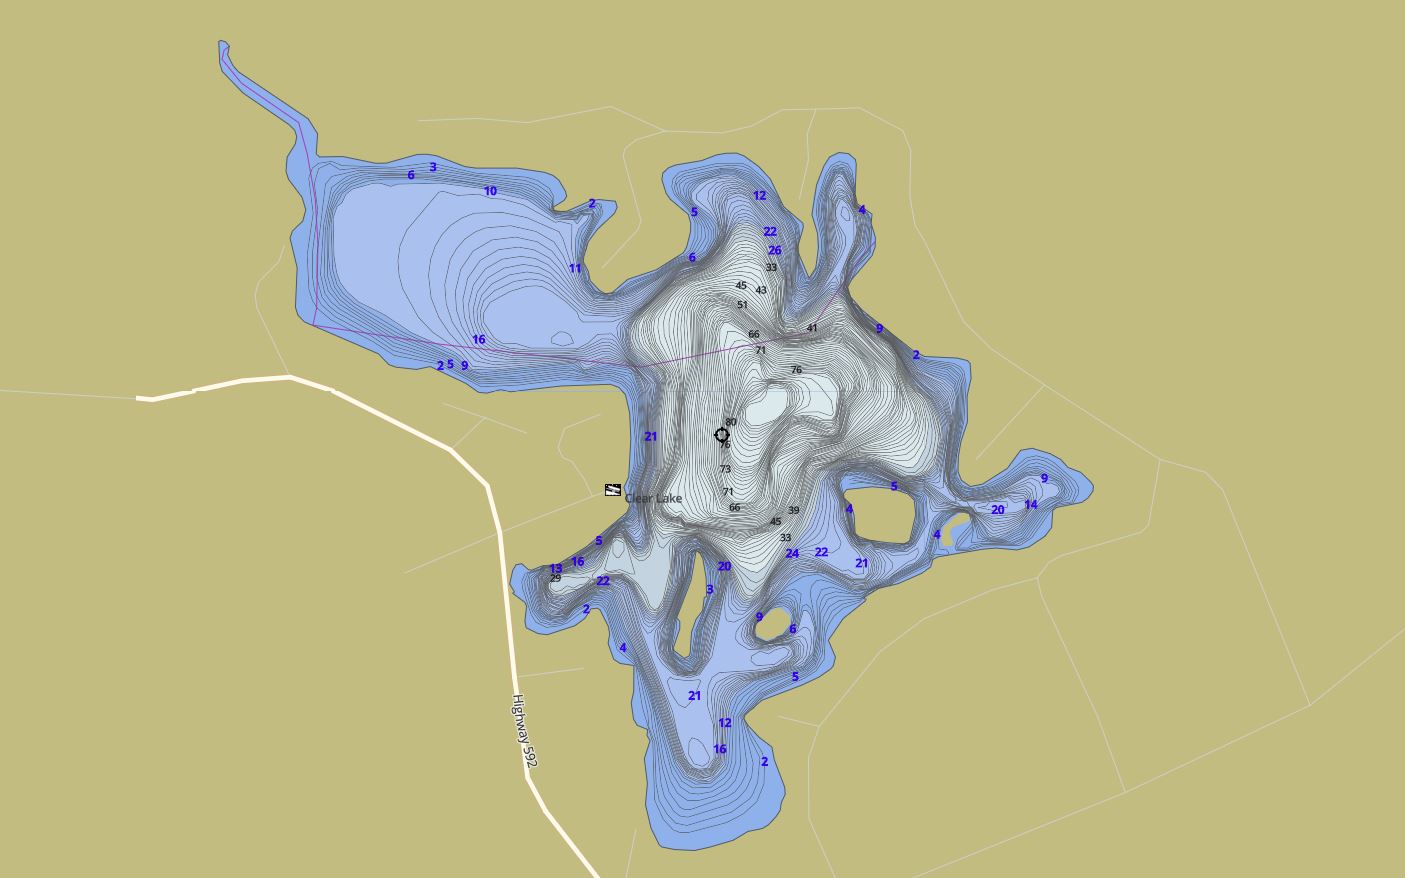 Contour Map of Clear Lake in Municipality of Perry and the District of Parry Sound